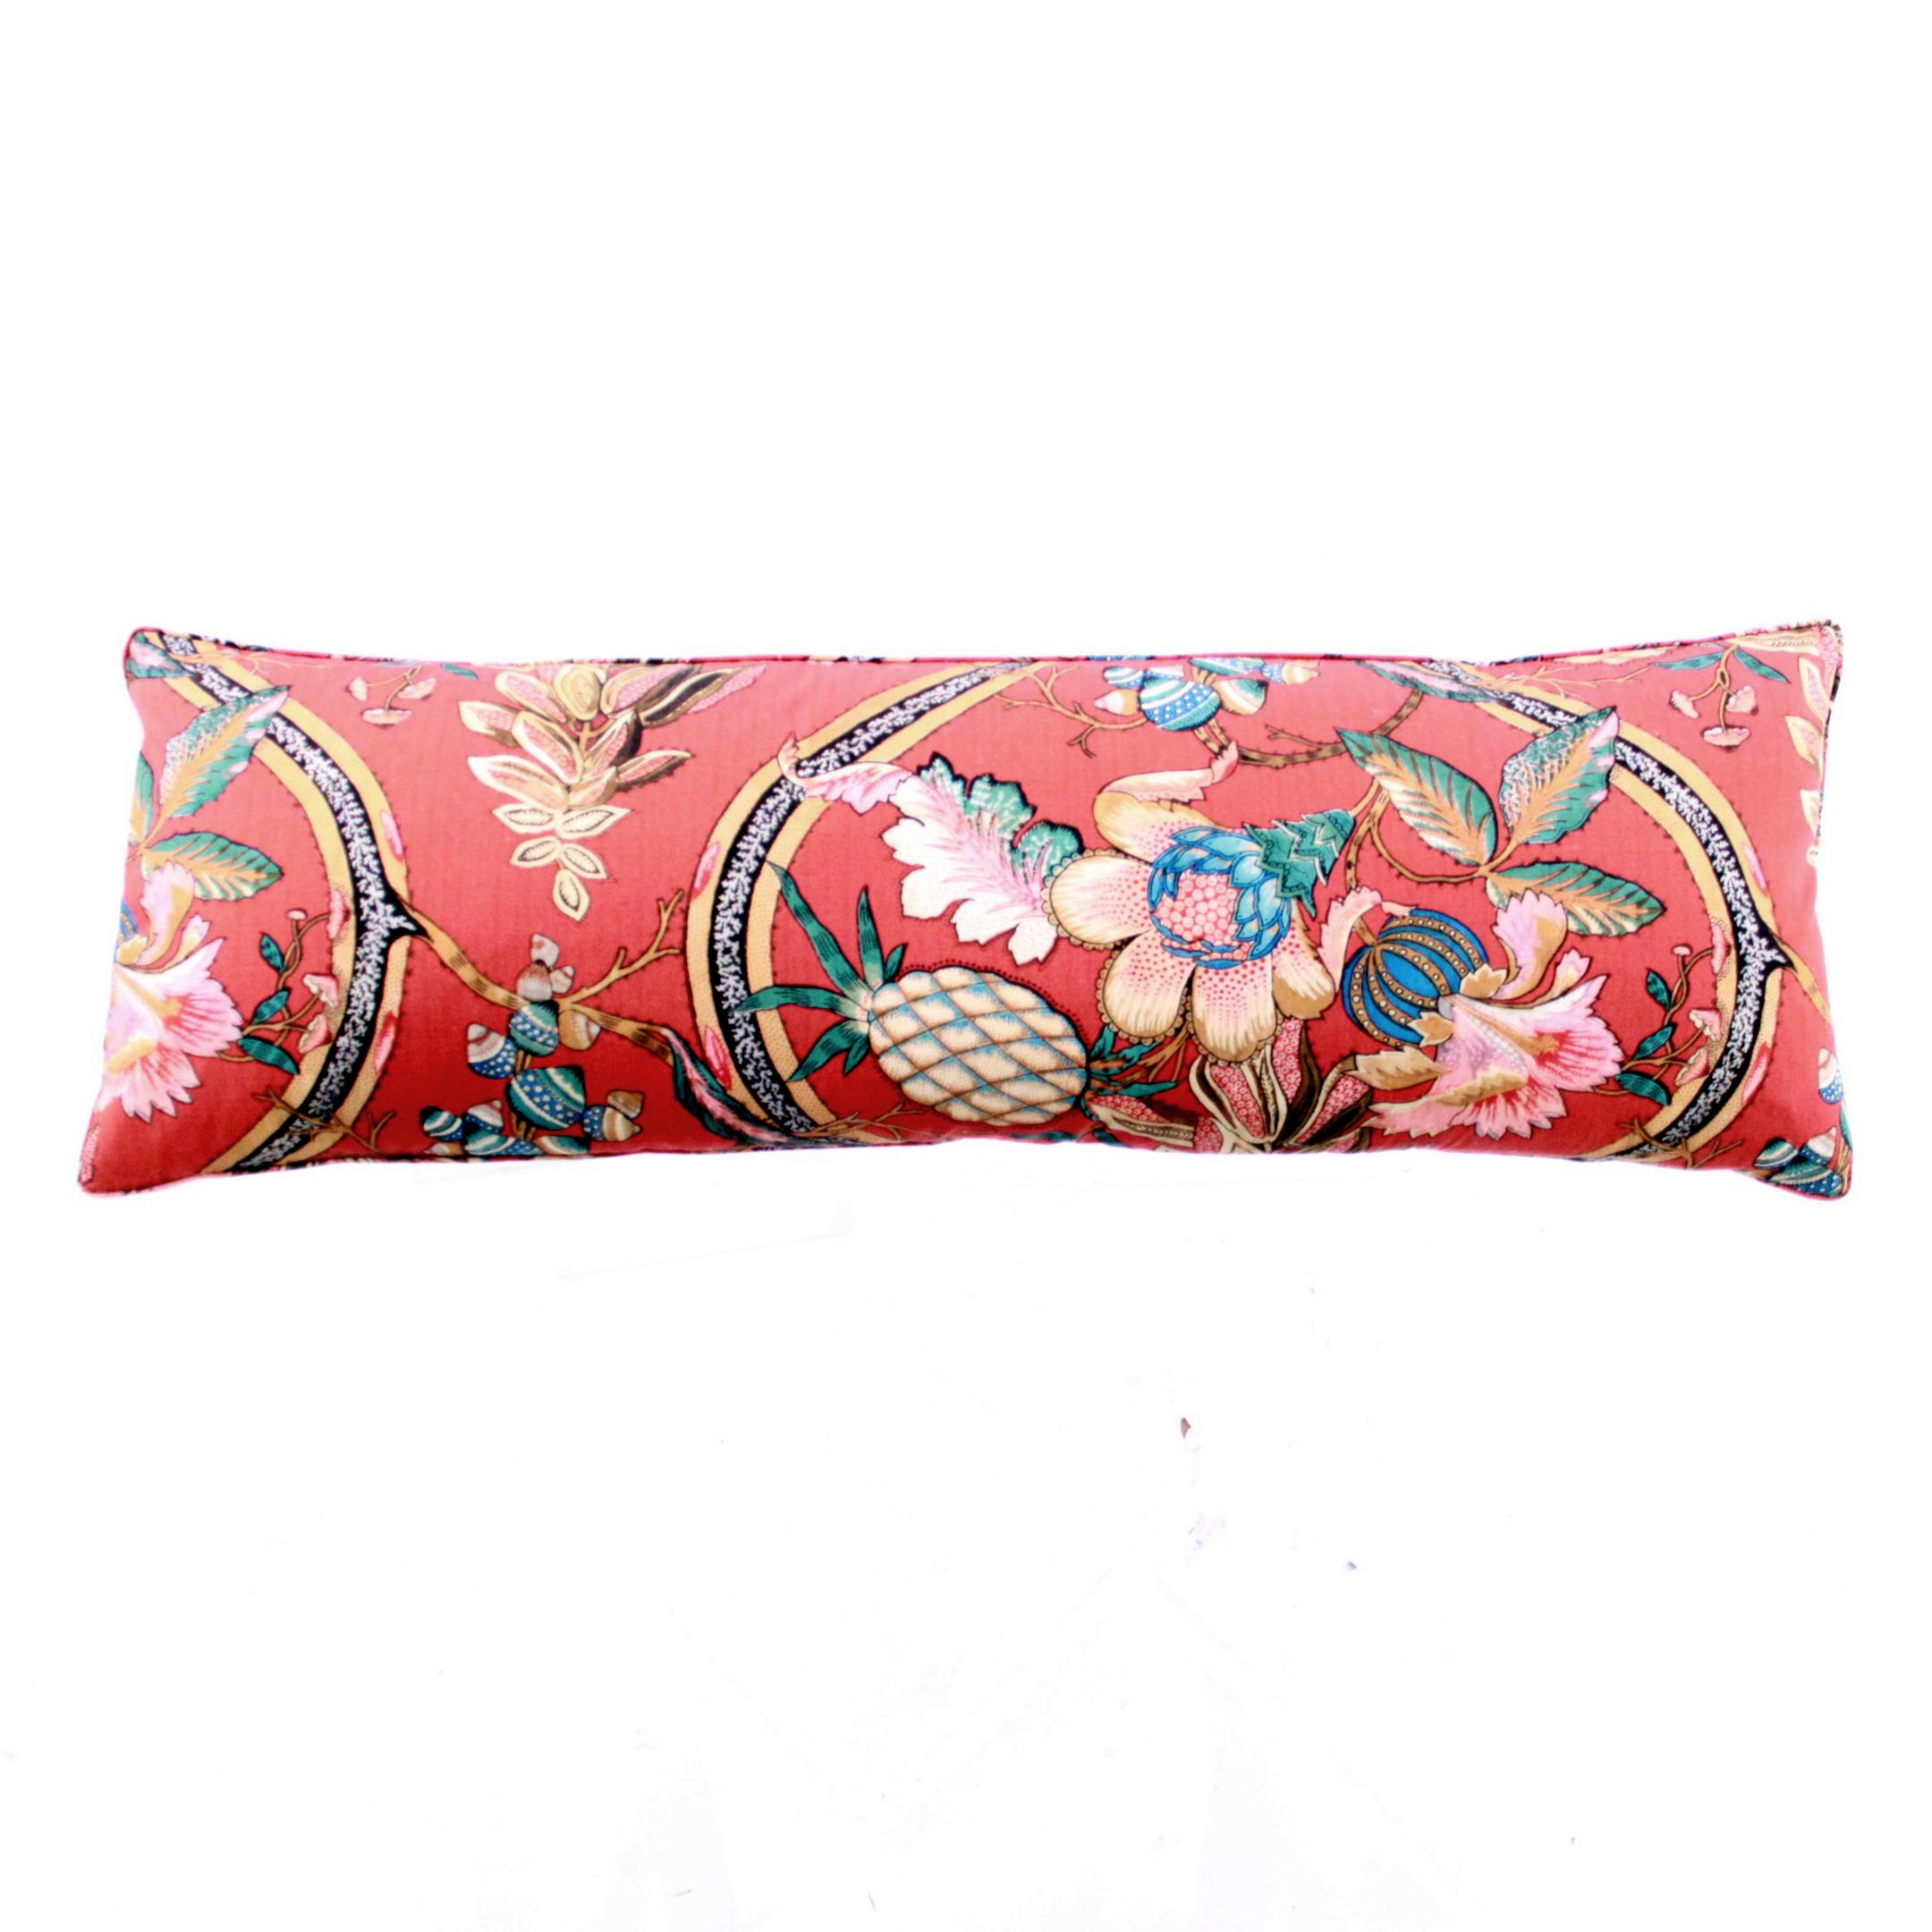 LA MAISON PIERRE FREY - BRAQUENIÉ

Beautiful handcrafted throw pillows made in beautiful and decorative Pierre Frey Braquenié fabric. 

The printed cotton fabric is on both sides with piping and is fitted with hidden zipper. 

Measures: 100 x